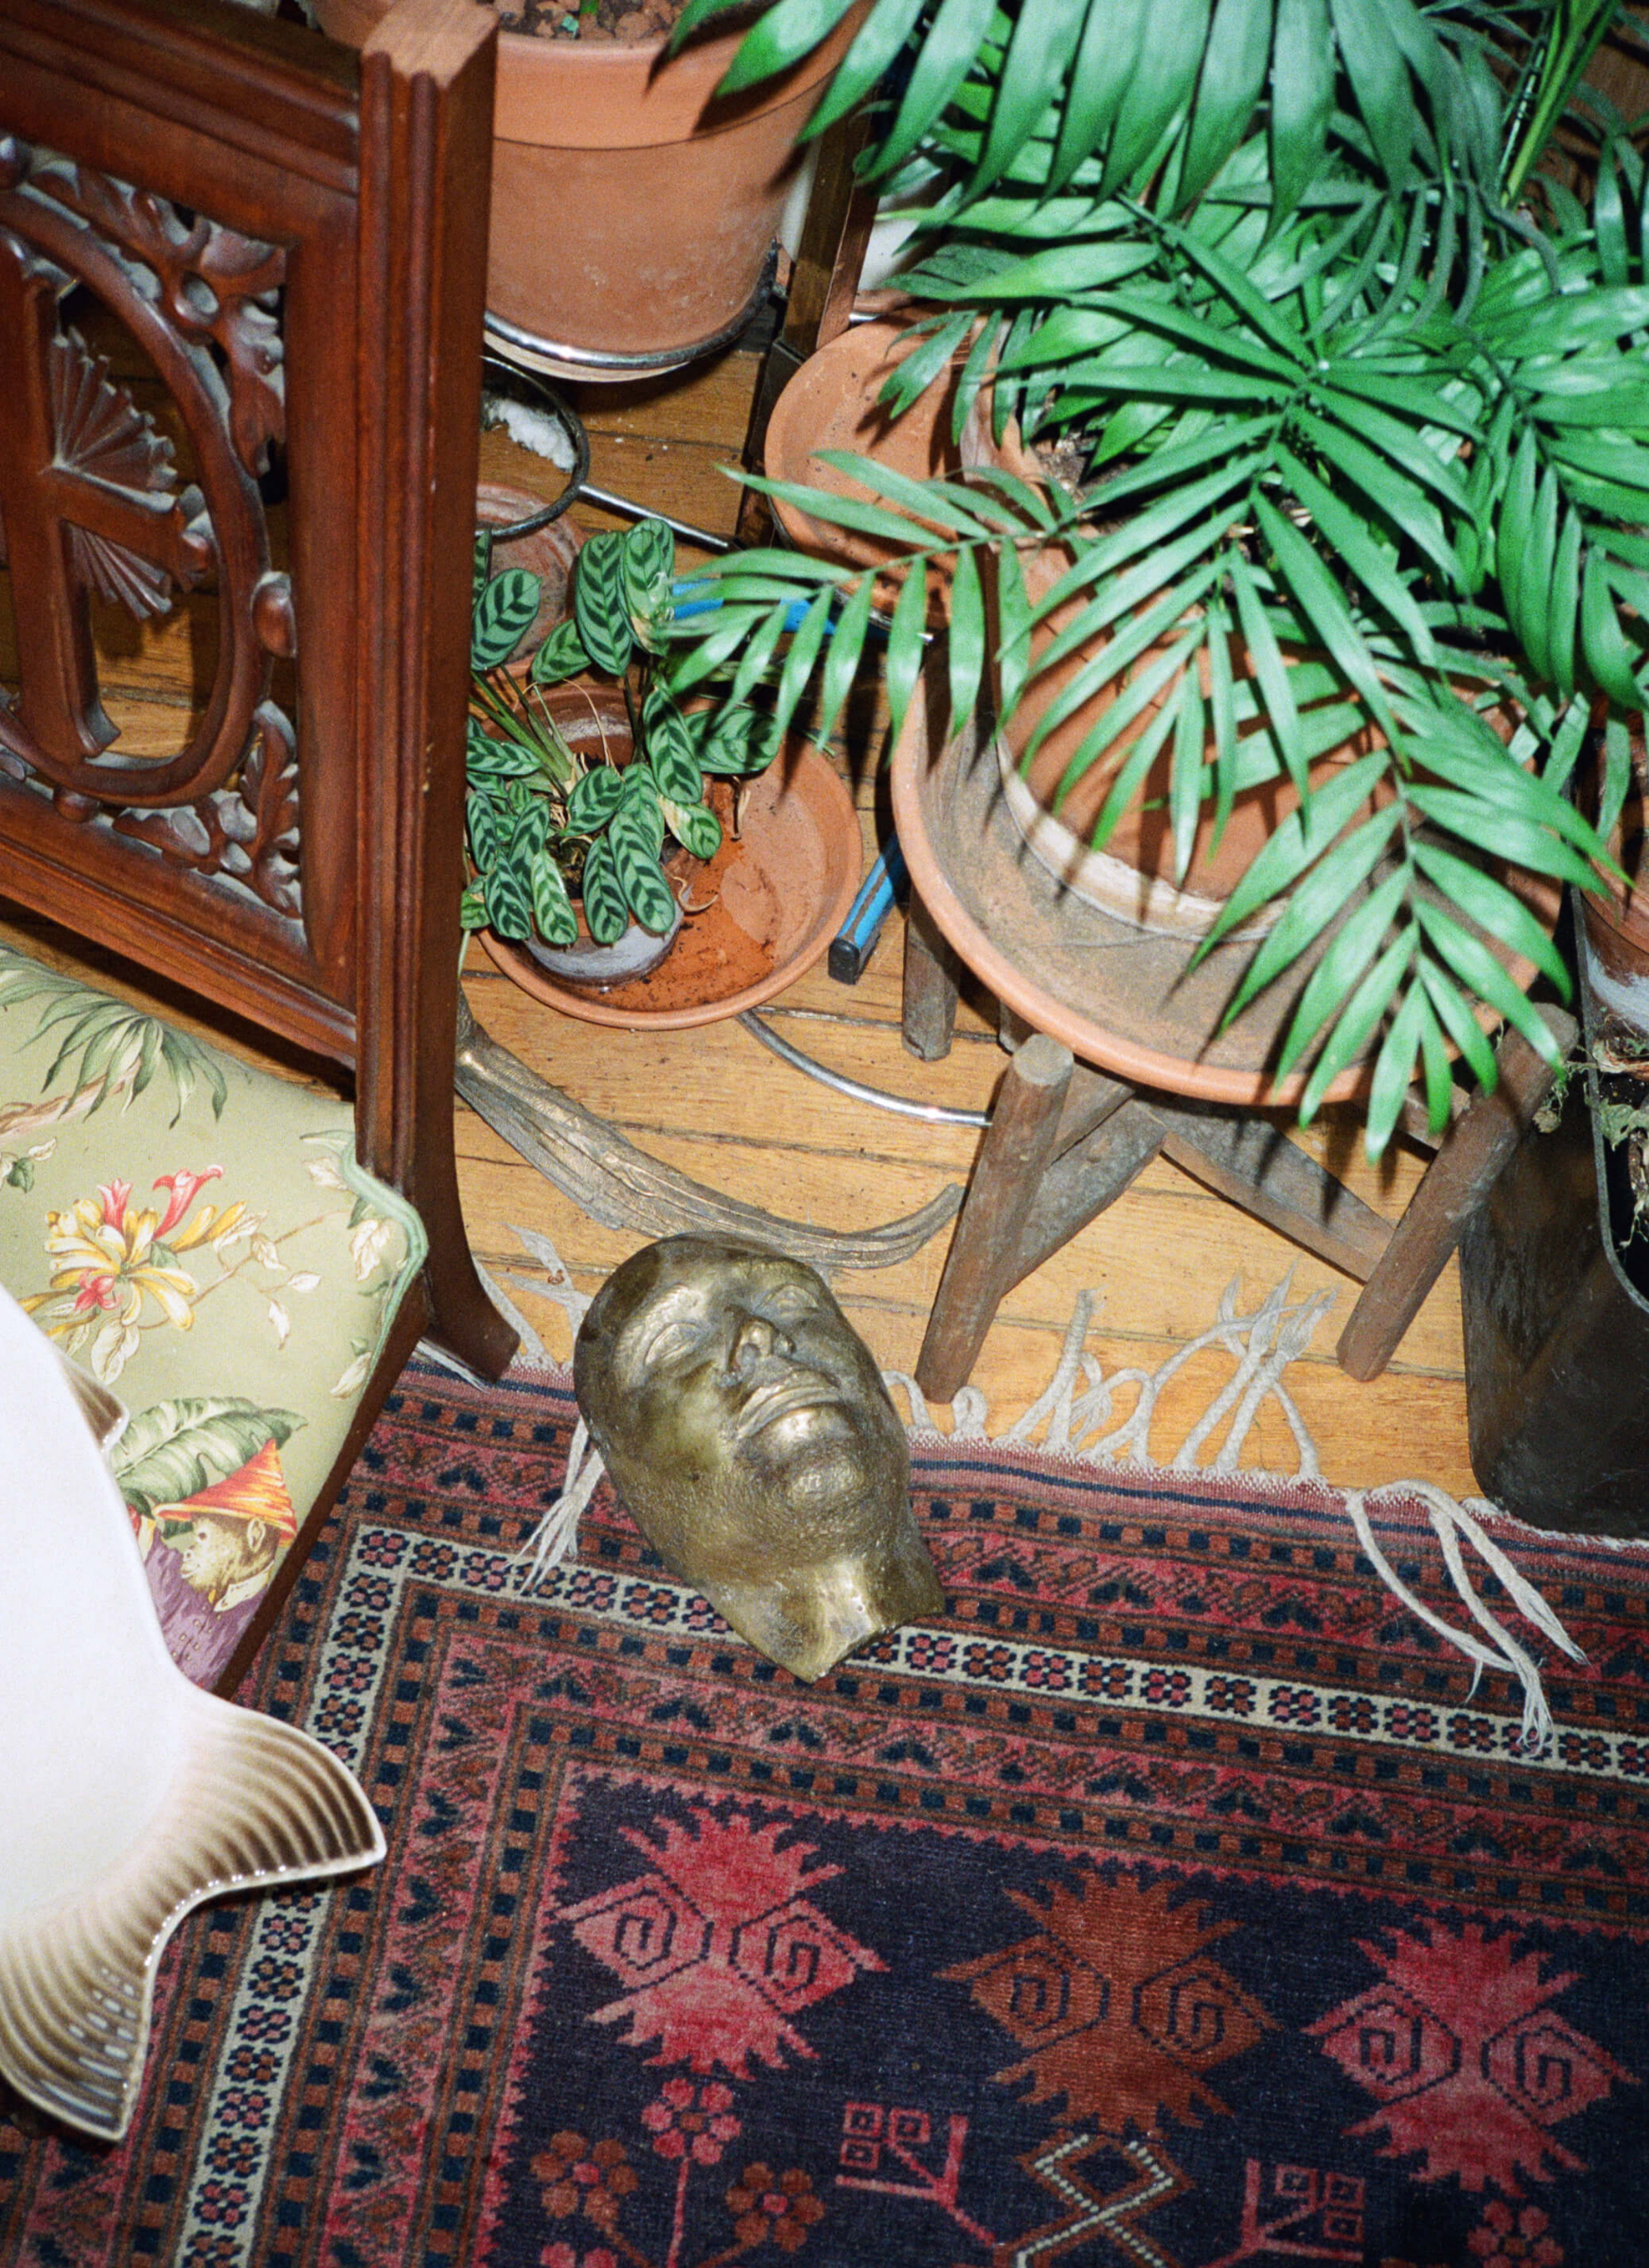 A metal made mask lying on the floor with a carpet on and there are some potted plants and terracotta pots around next to a chair with floral cover cushion.